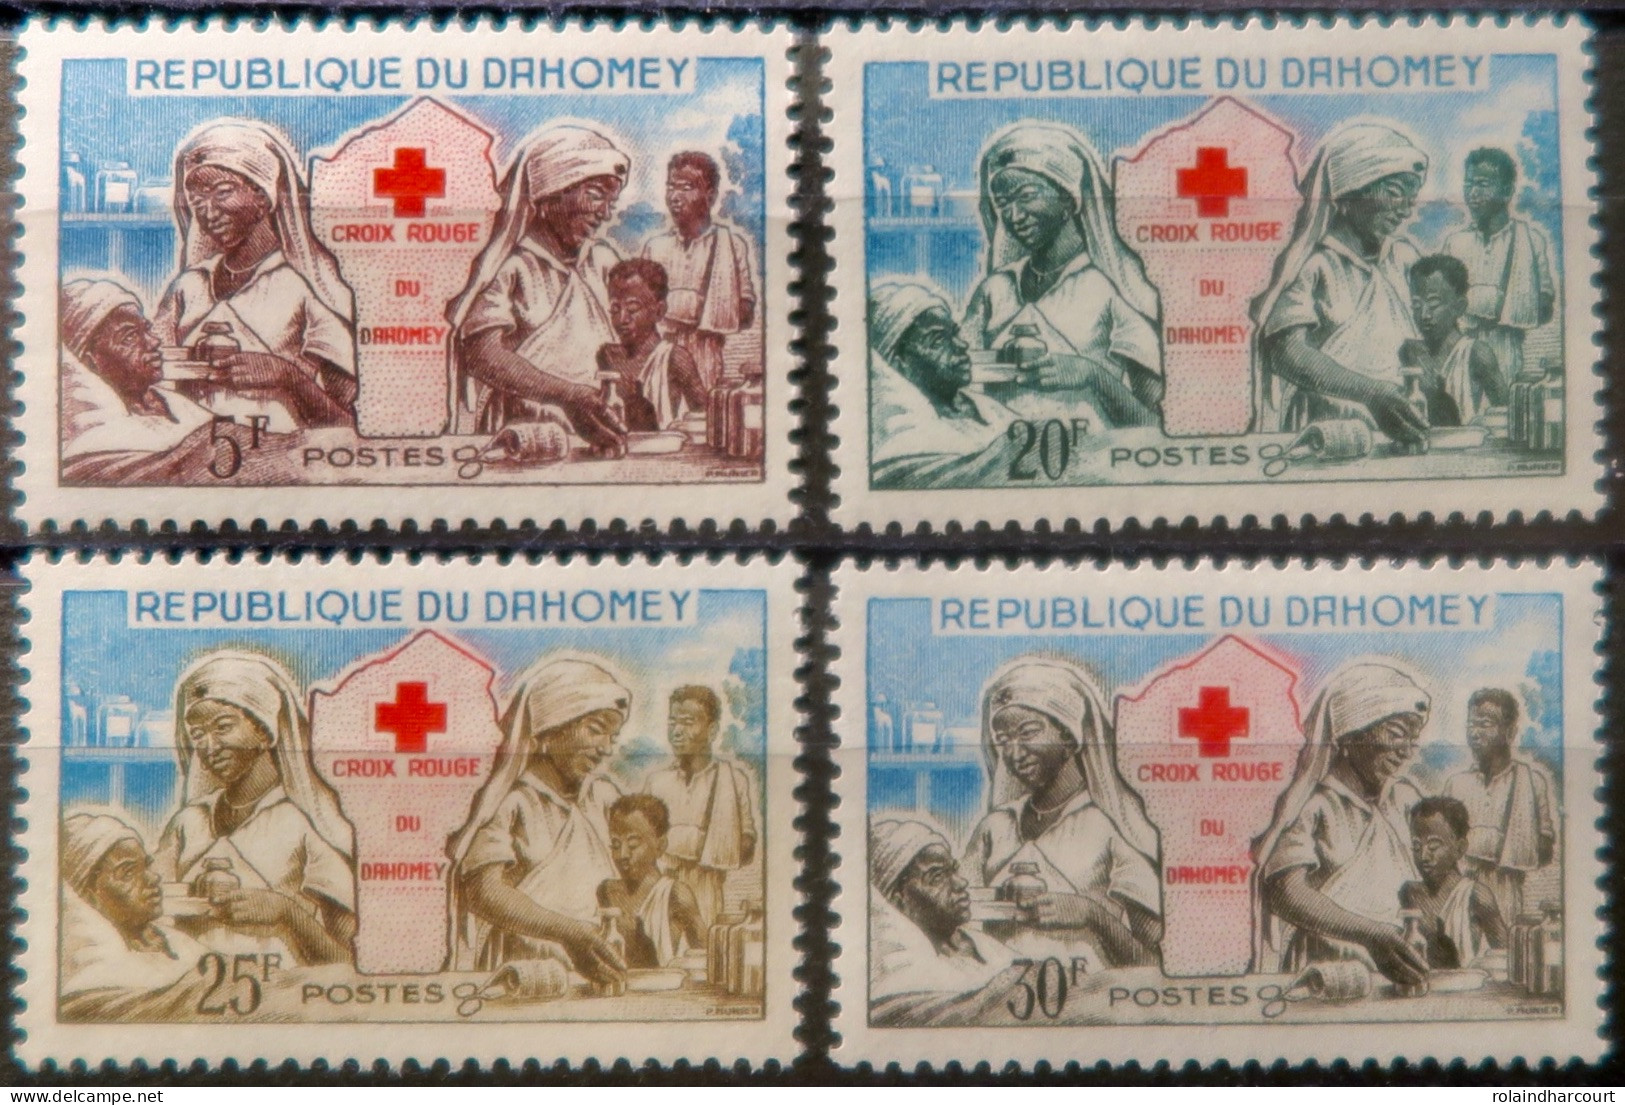 R2253/735 - DAHOMEY - 1962 - CROIX ROUGE - SERIE COMPLETE - N°175 à 178 NEUFS** - Unused Stamps